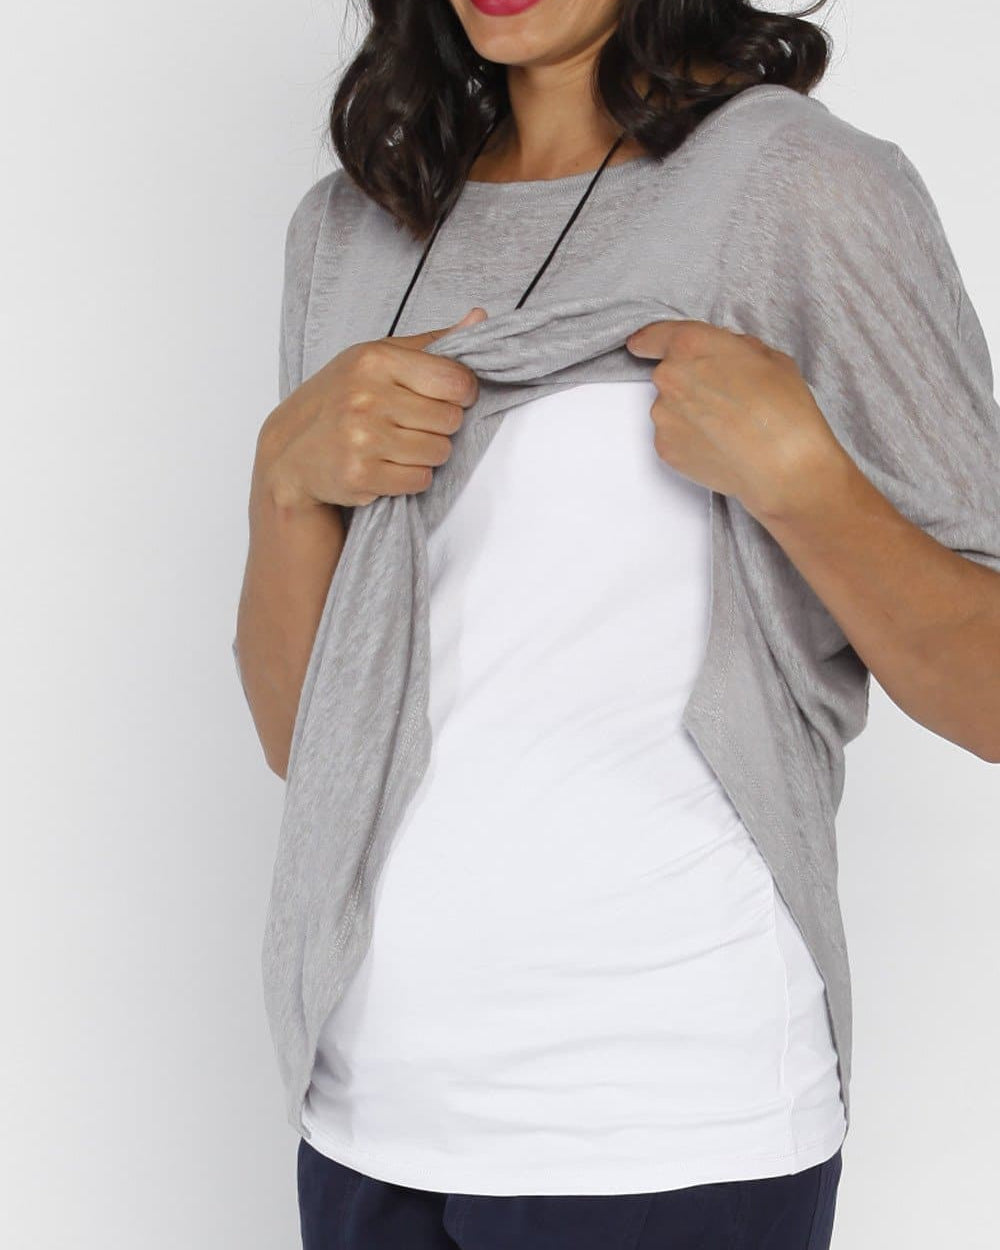 Breastfeeding Double Layer Nursing Top - Grey & White - Angel Maternity - Maternity clothes - shop online (9984283462)